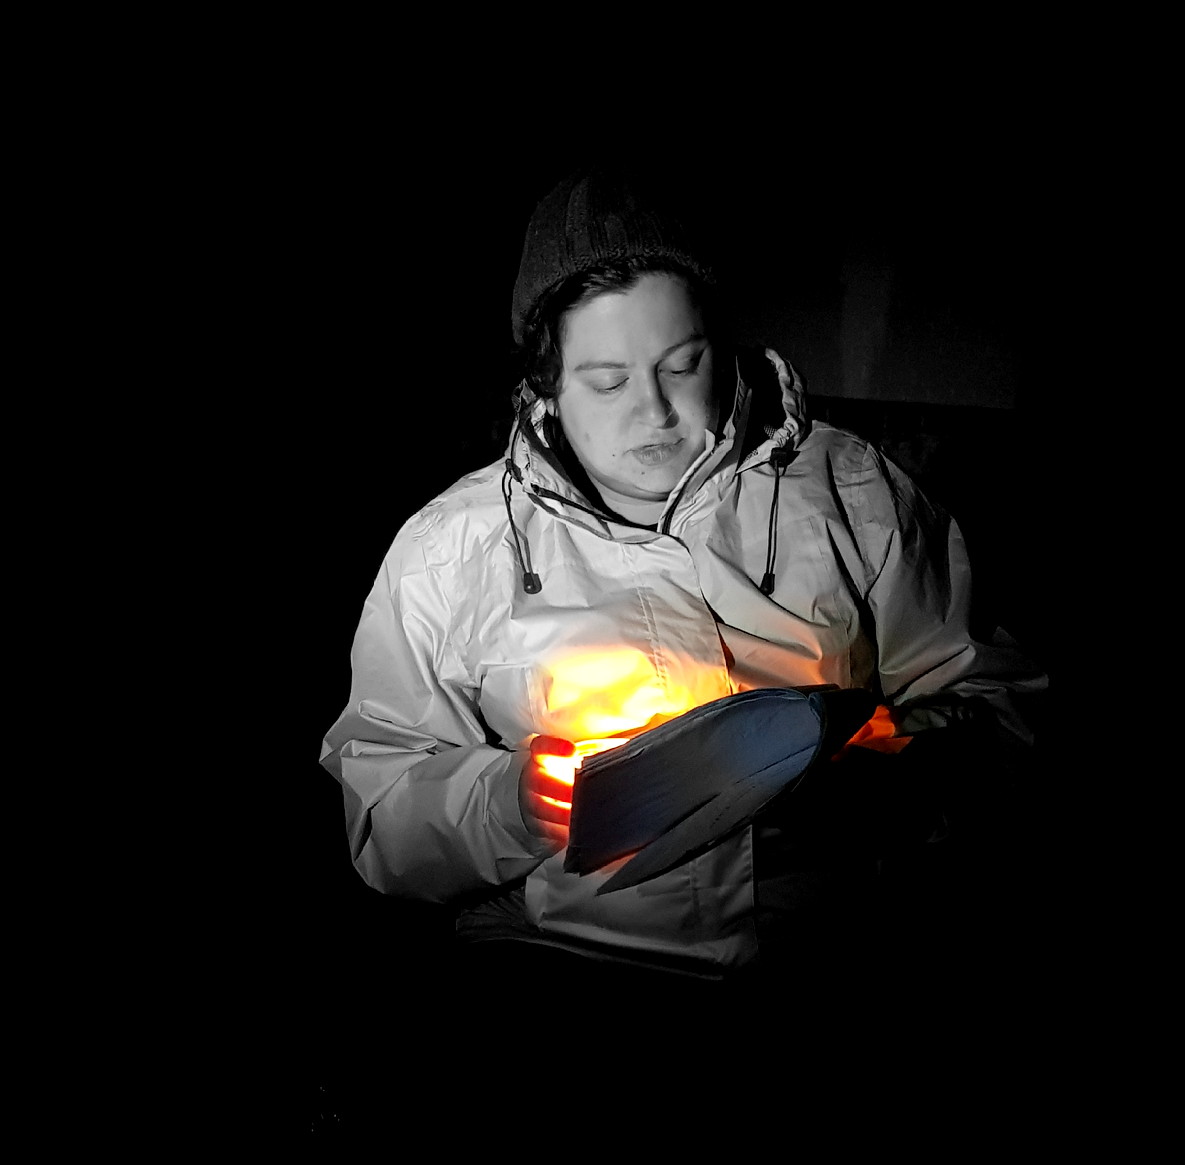 A woman sitting in the dark reading a poem by candle light